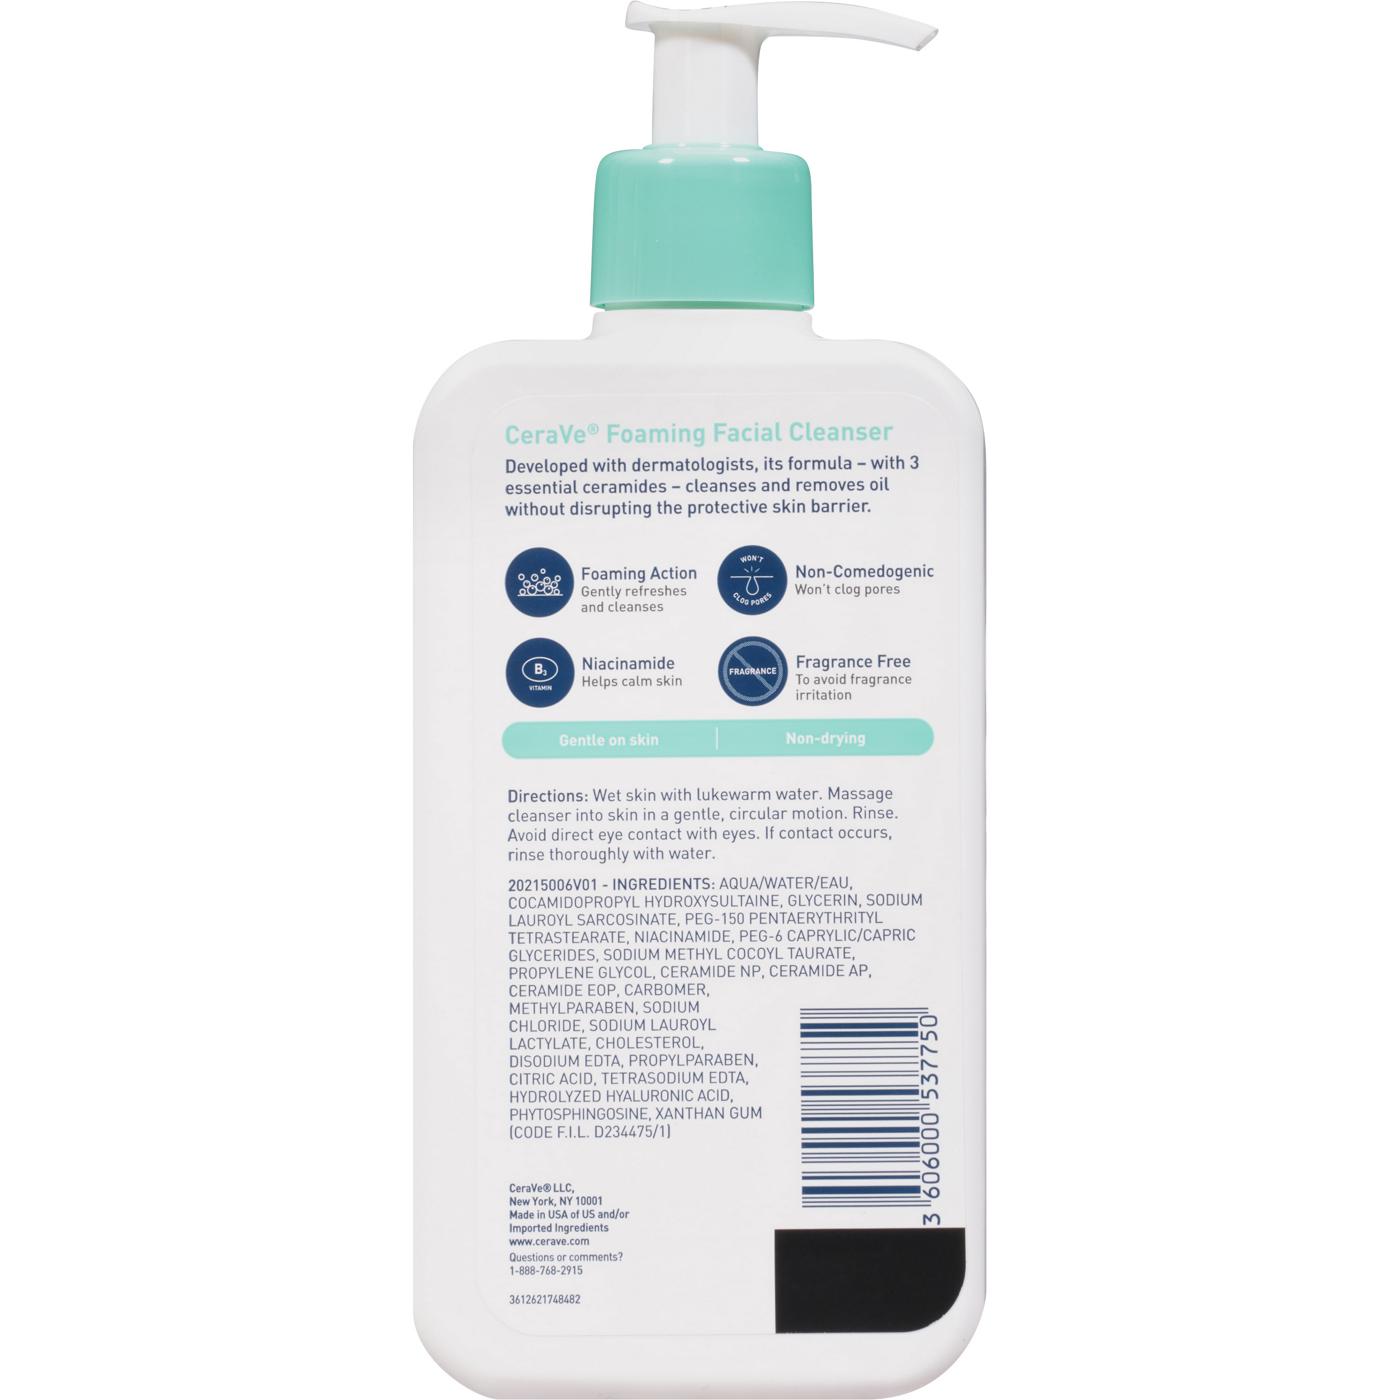 CeraVe Foaming Facial Cleanser; image 3 of 3